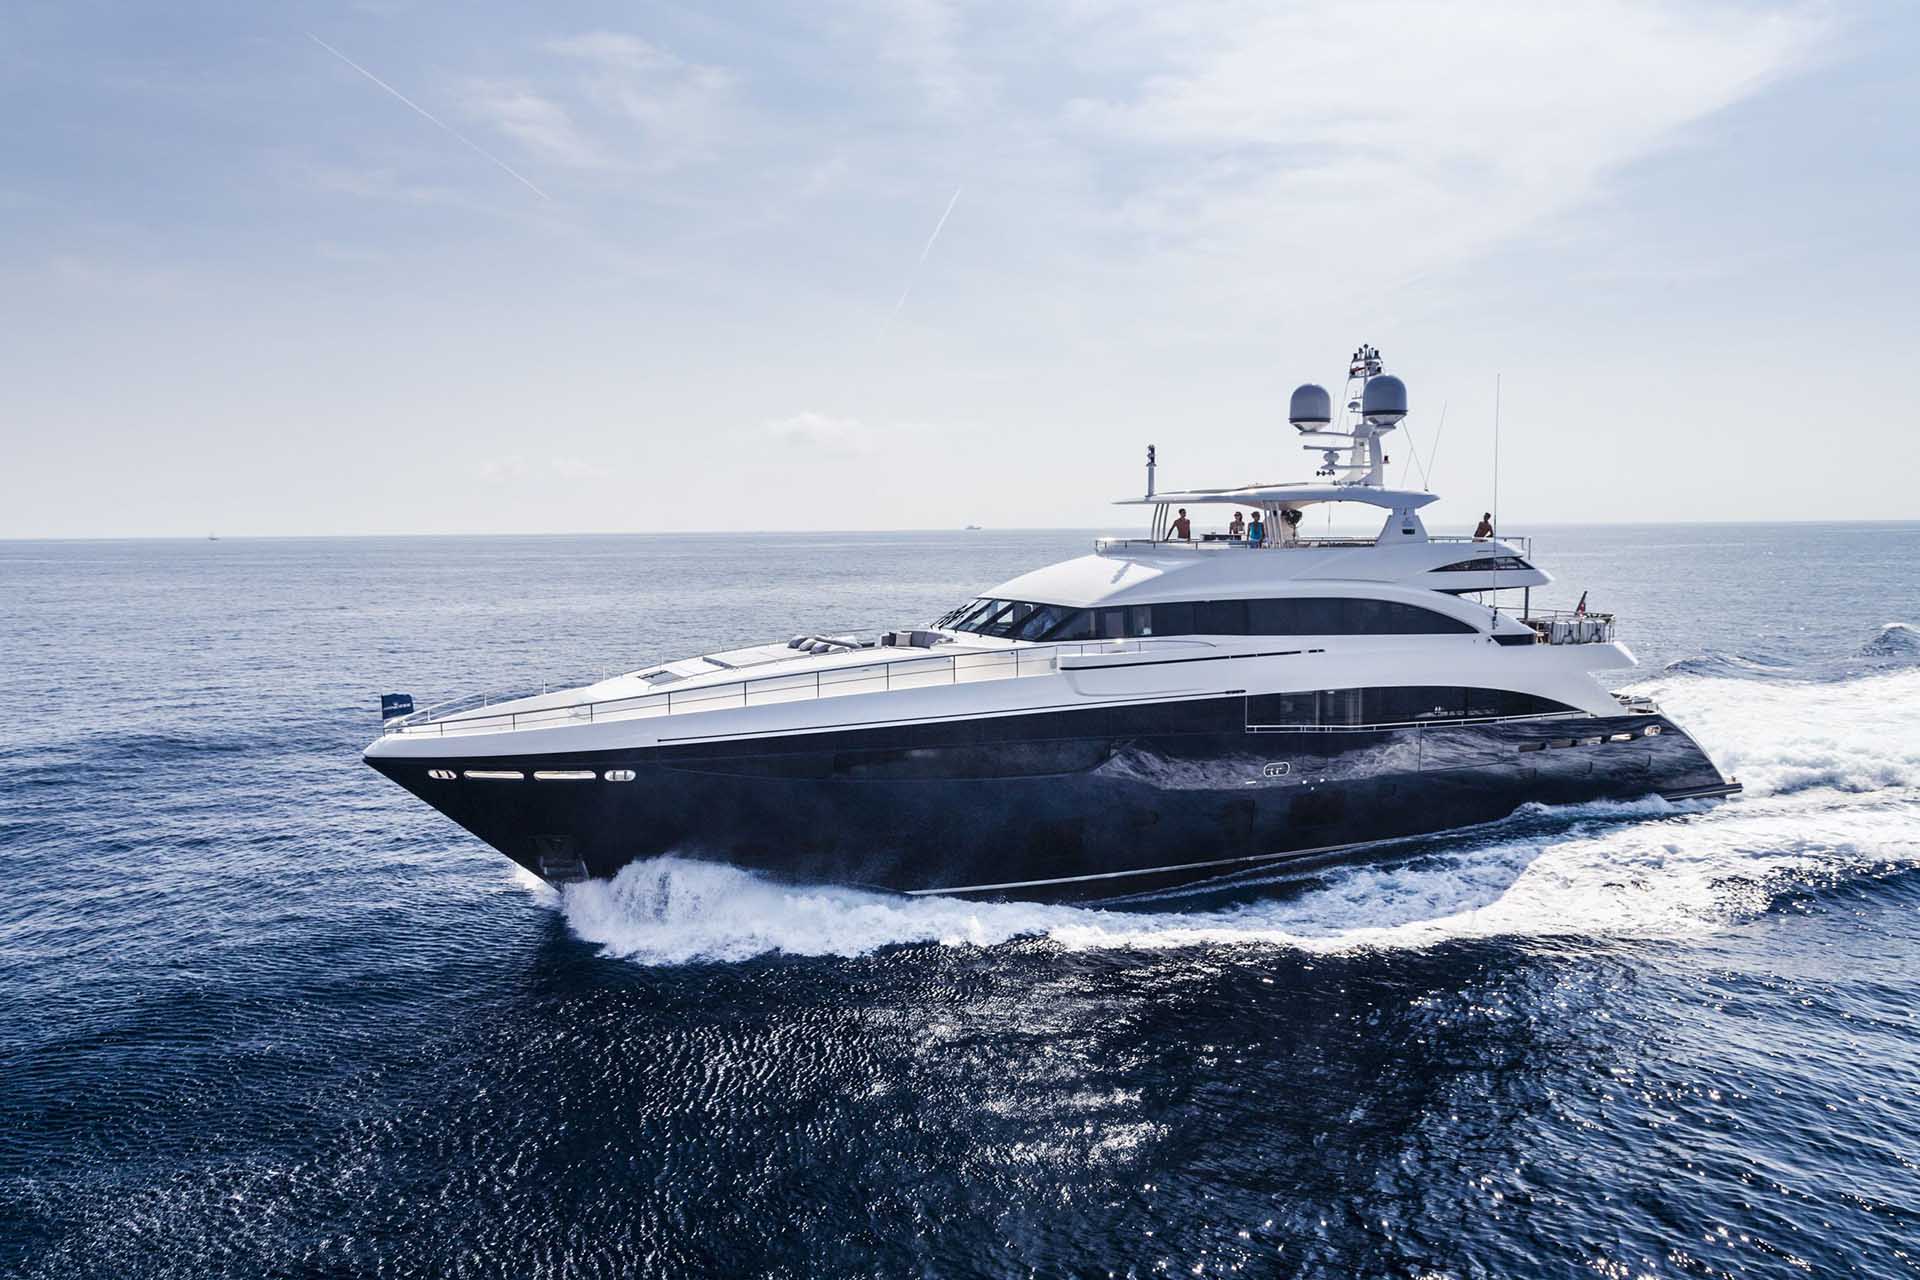 Princess Yachts for Sale, Luxuxry Yacht Brokers